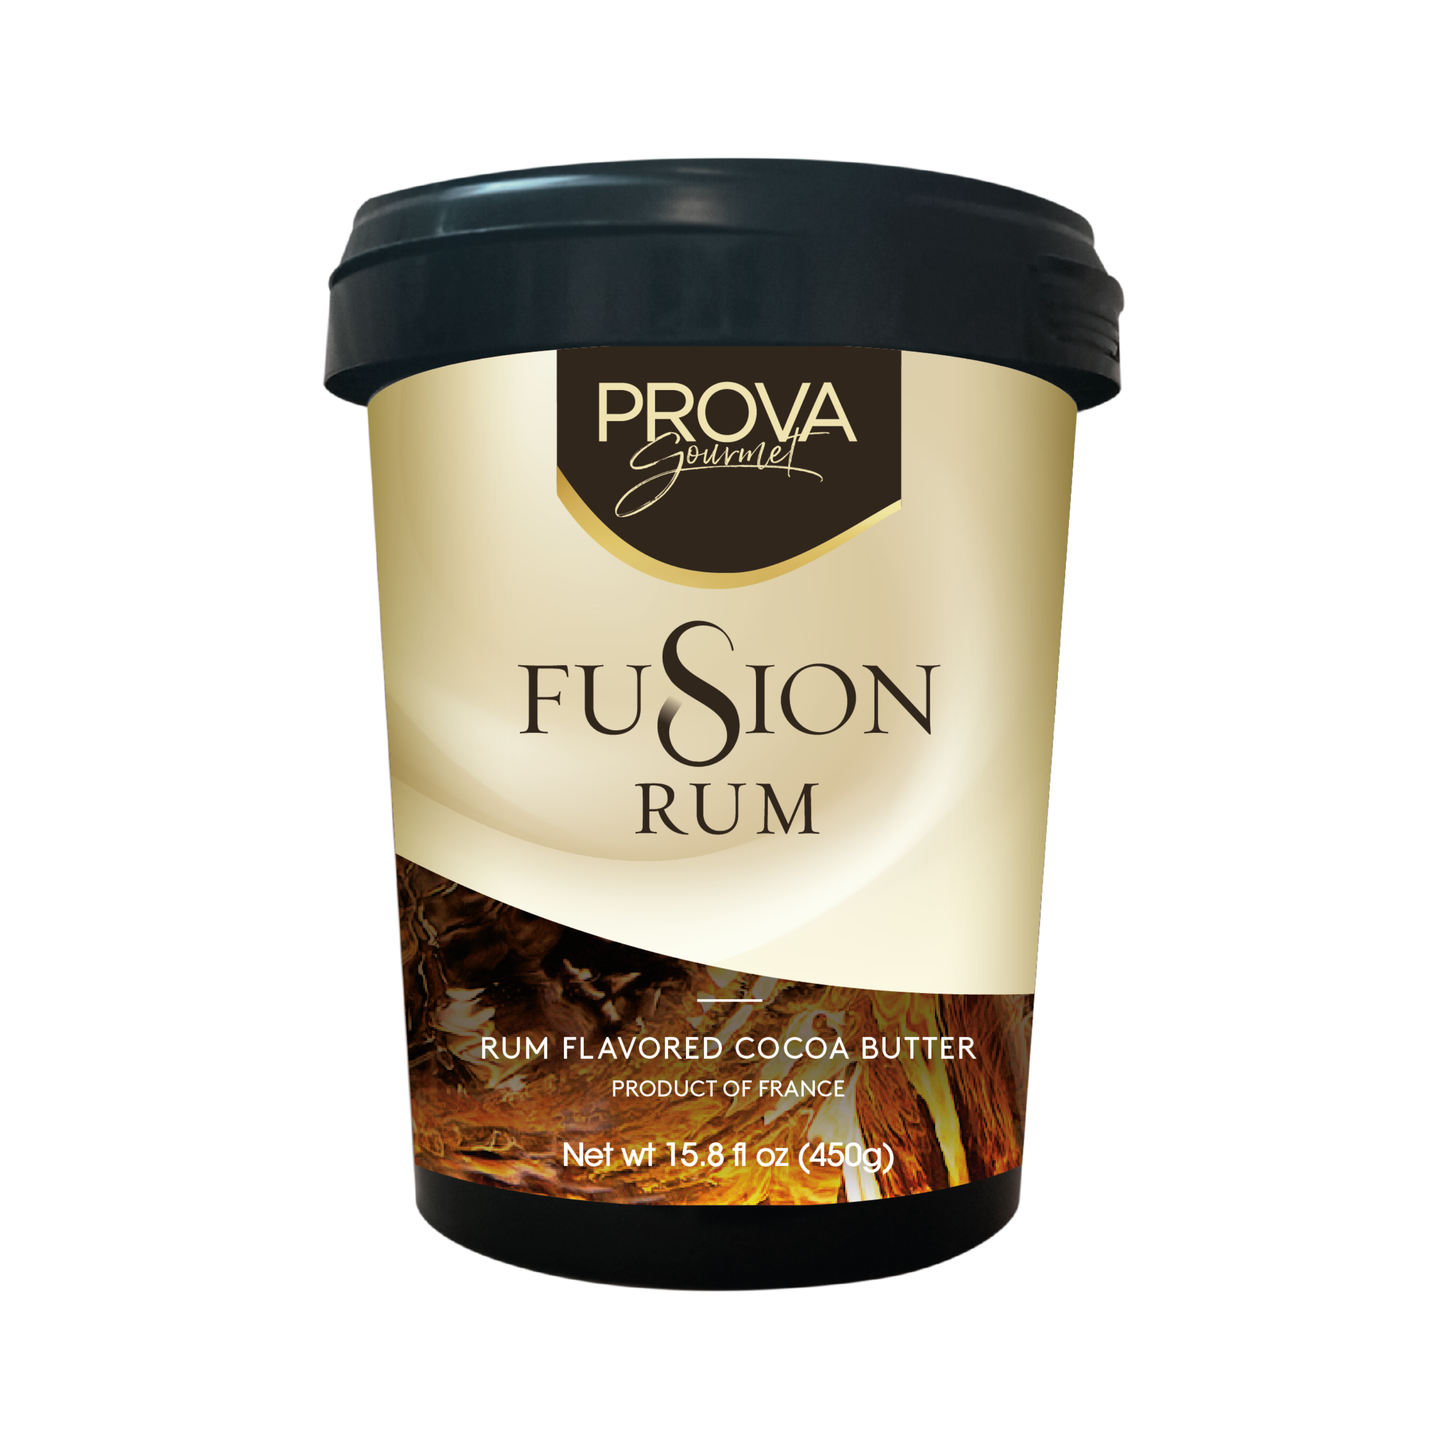 FUSION Rum: Rum Flavored Cocoa Butter